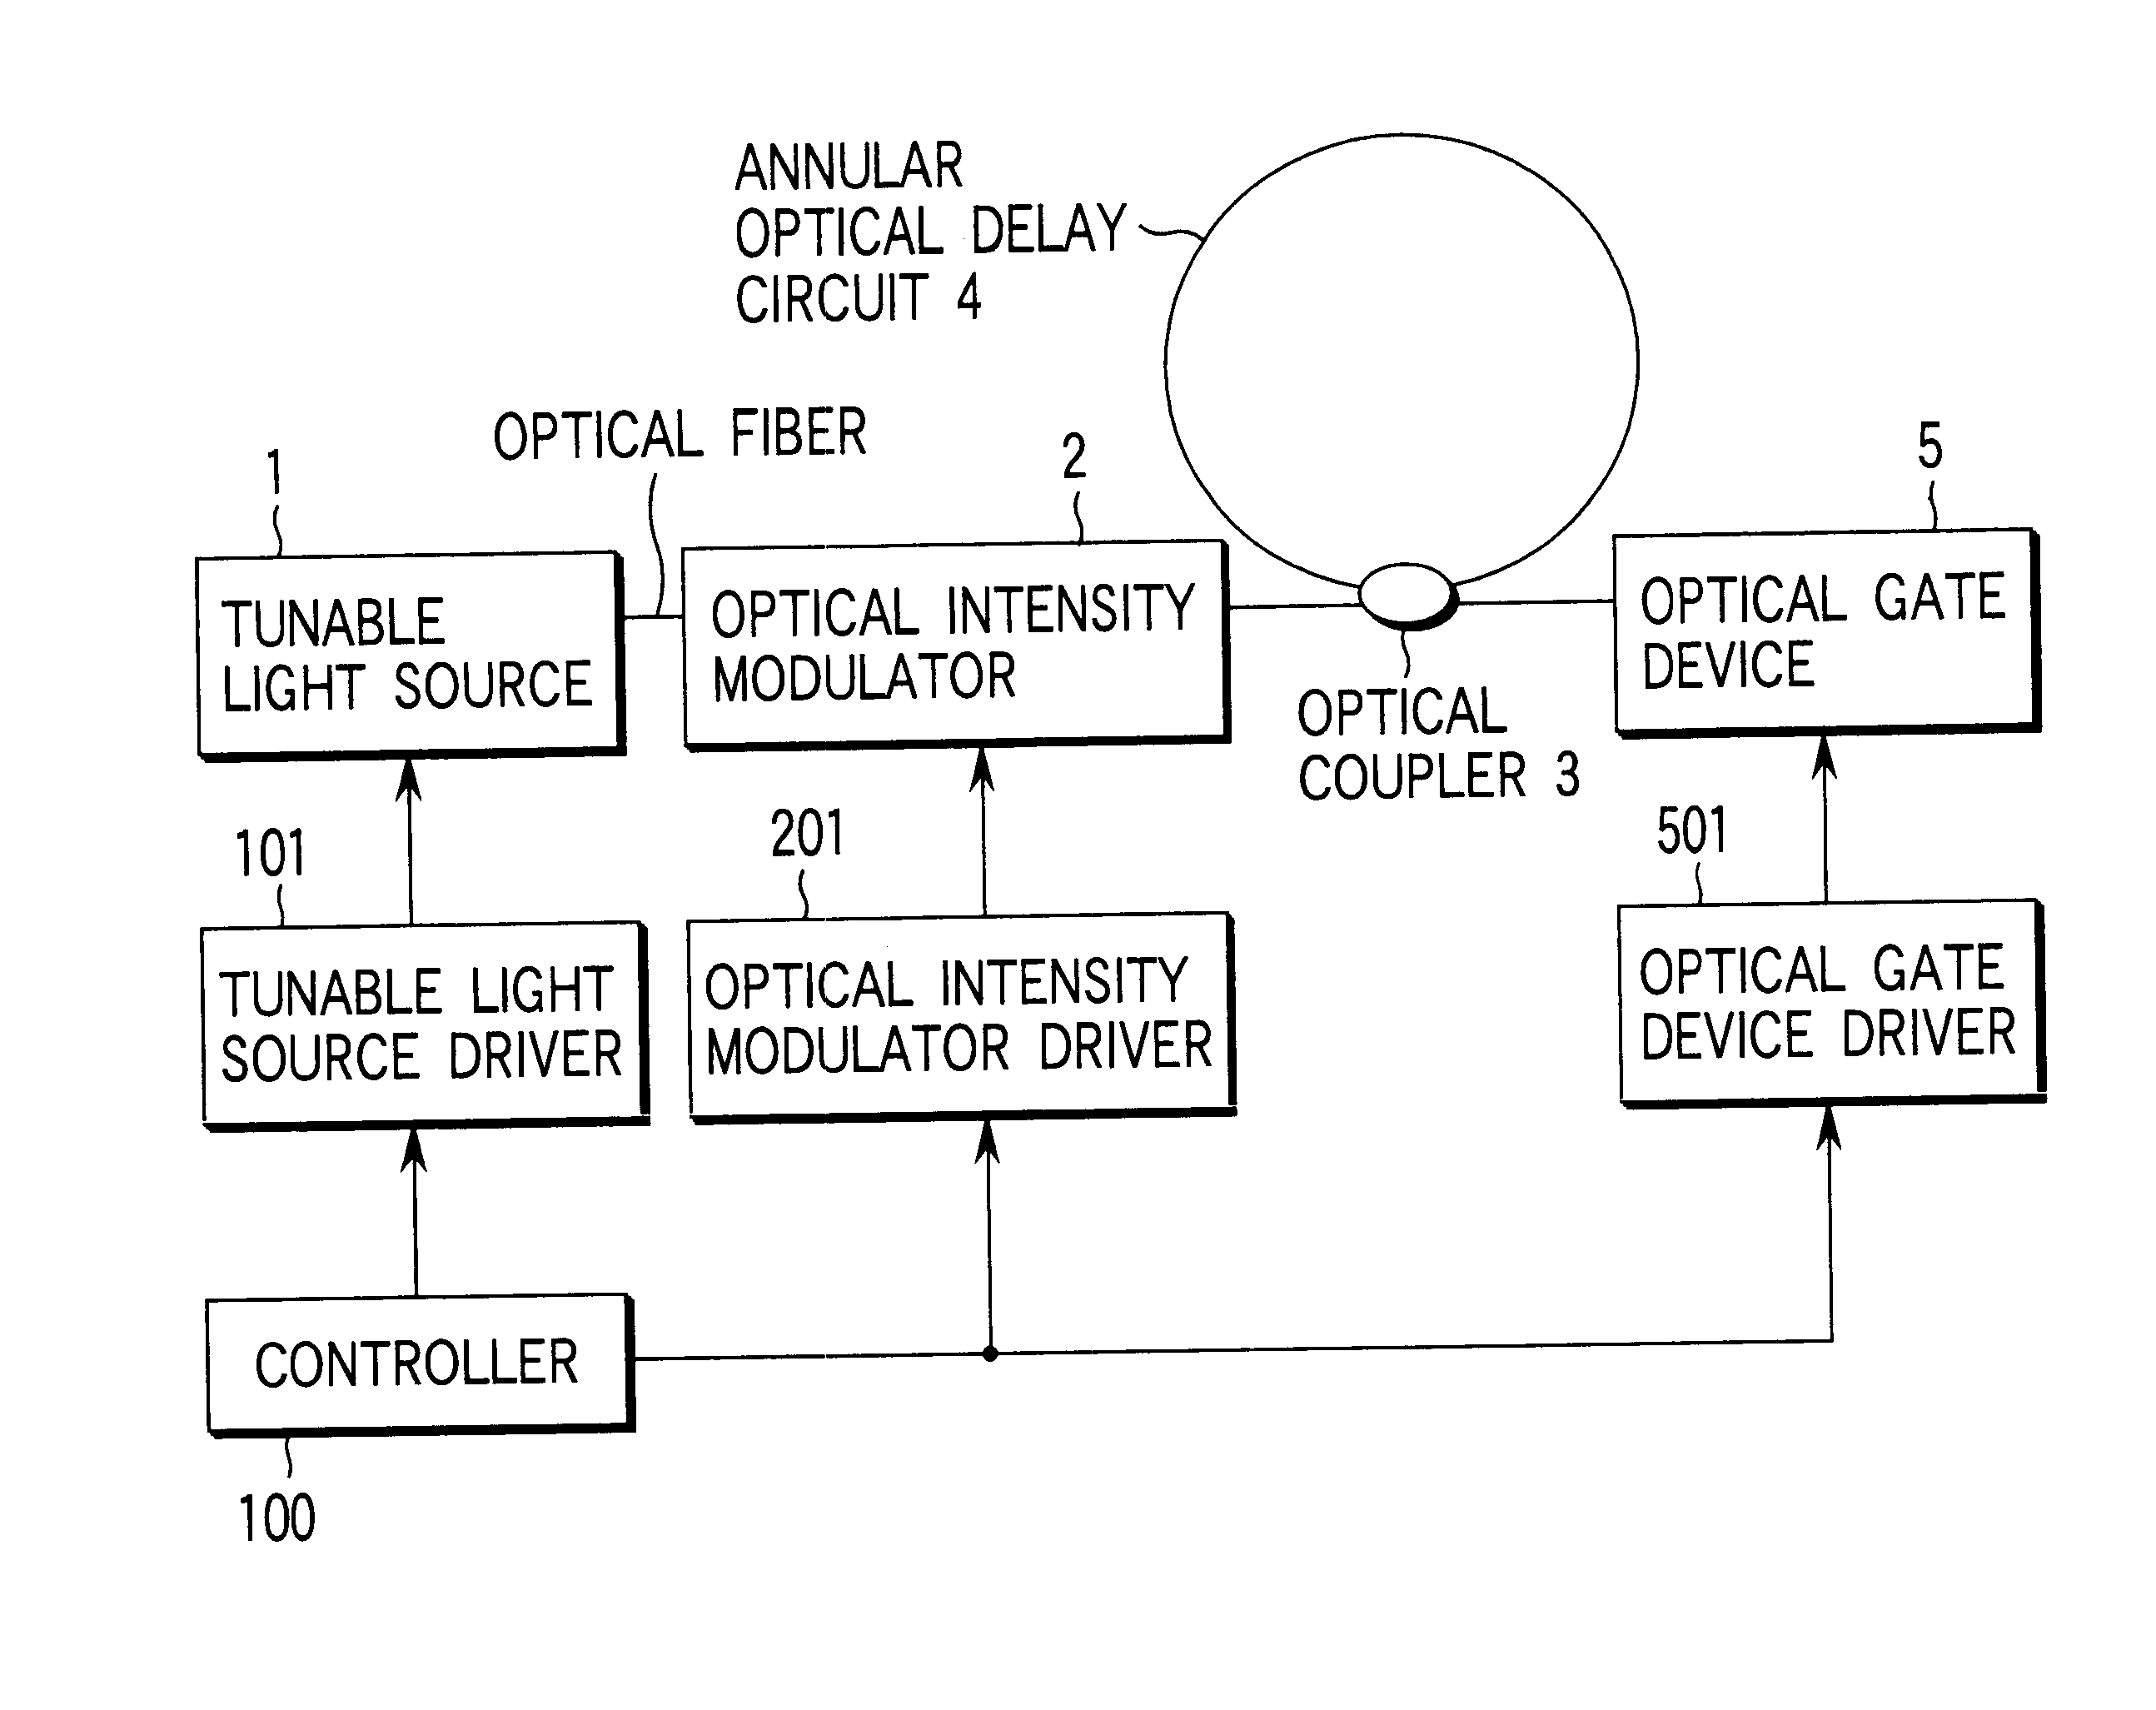 Multiwavelength light source device employing annular optical delay circuit